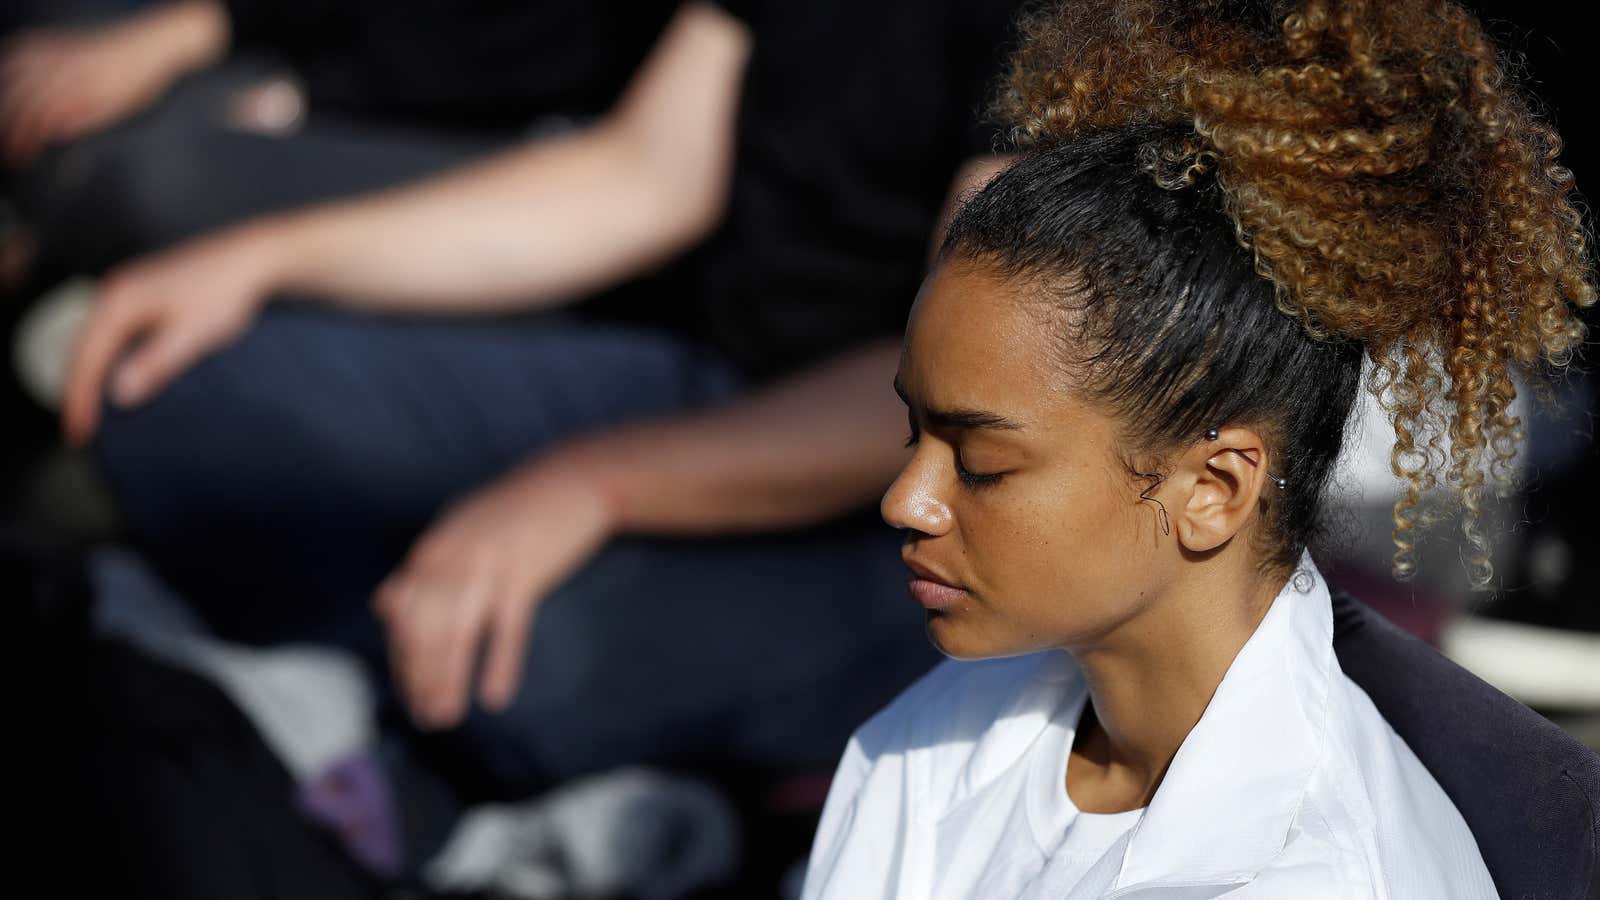 Participants meditate during an event in The Gherkin in London’s financial district on World Meditation Day, Britain, May 21, 2019.